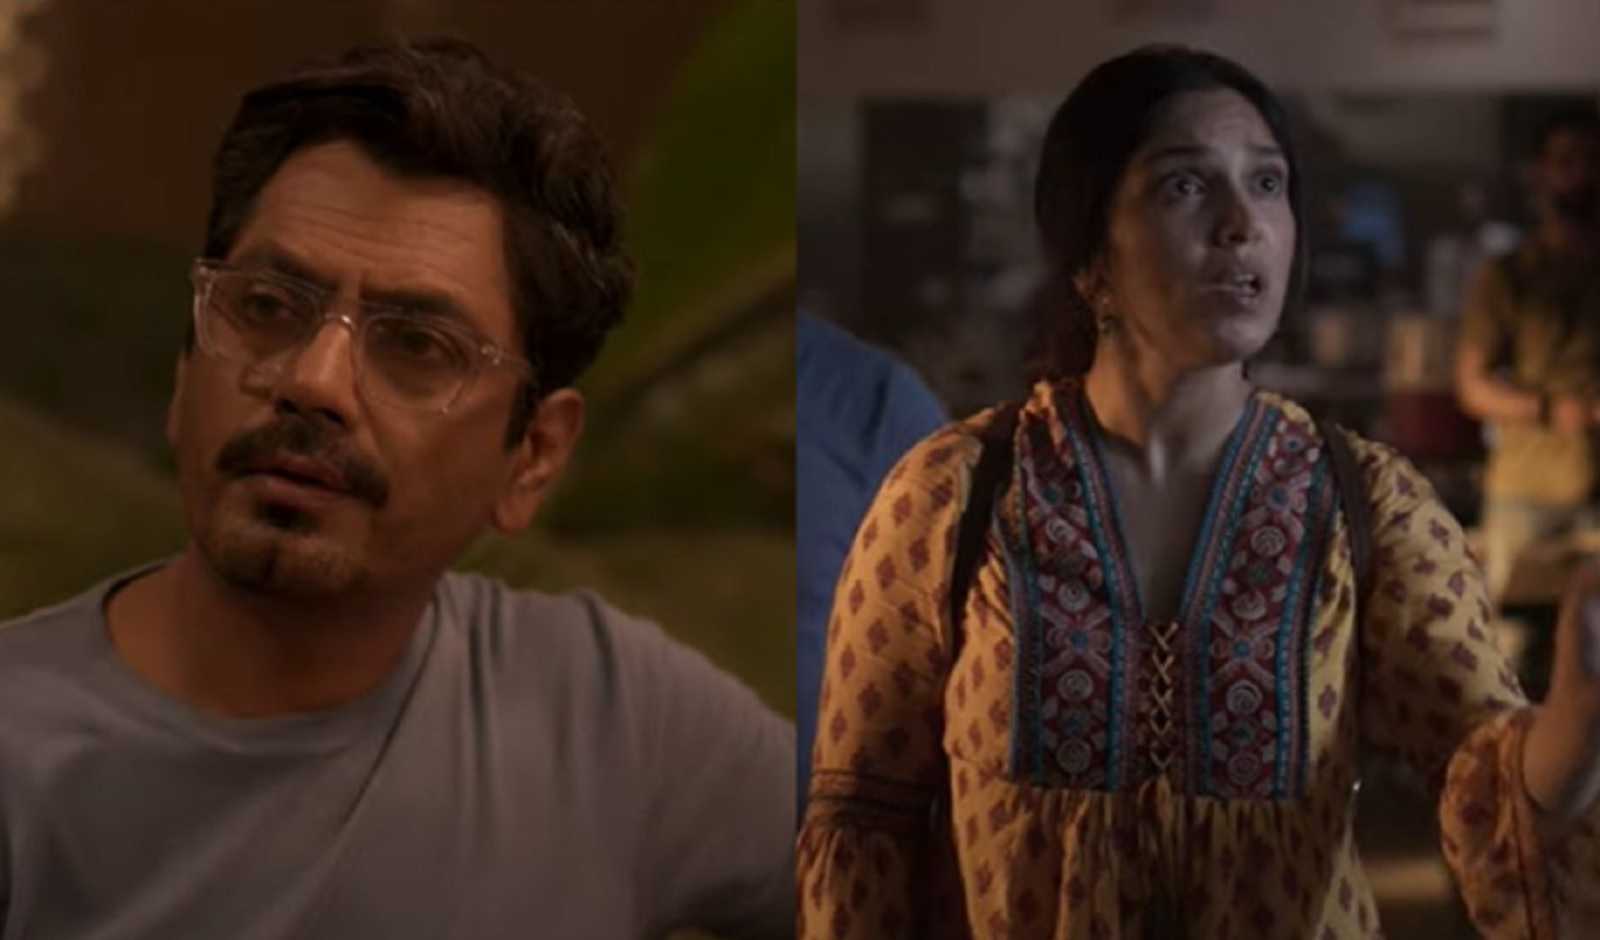 Afwaah trailer: Nawazuddin Siddiqui and Bhumi Pednekar's lives turn upside down following a vicious rumour in Sudhir Mishra's political thriller